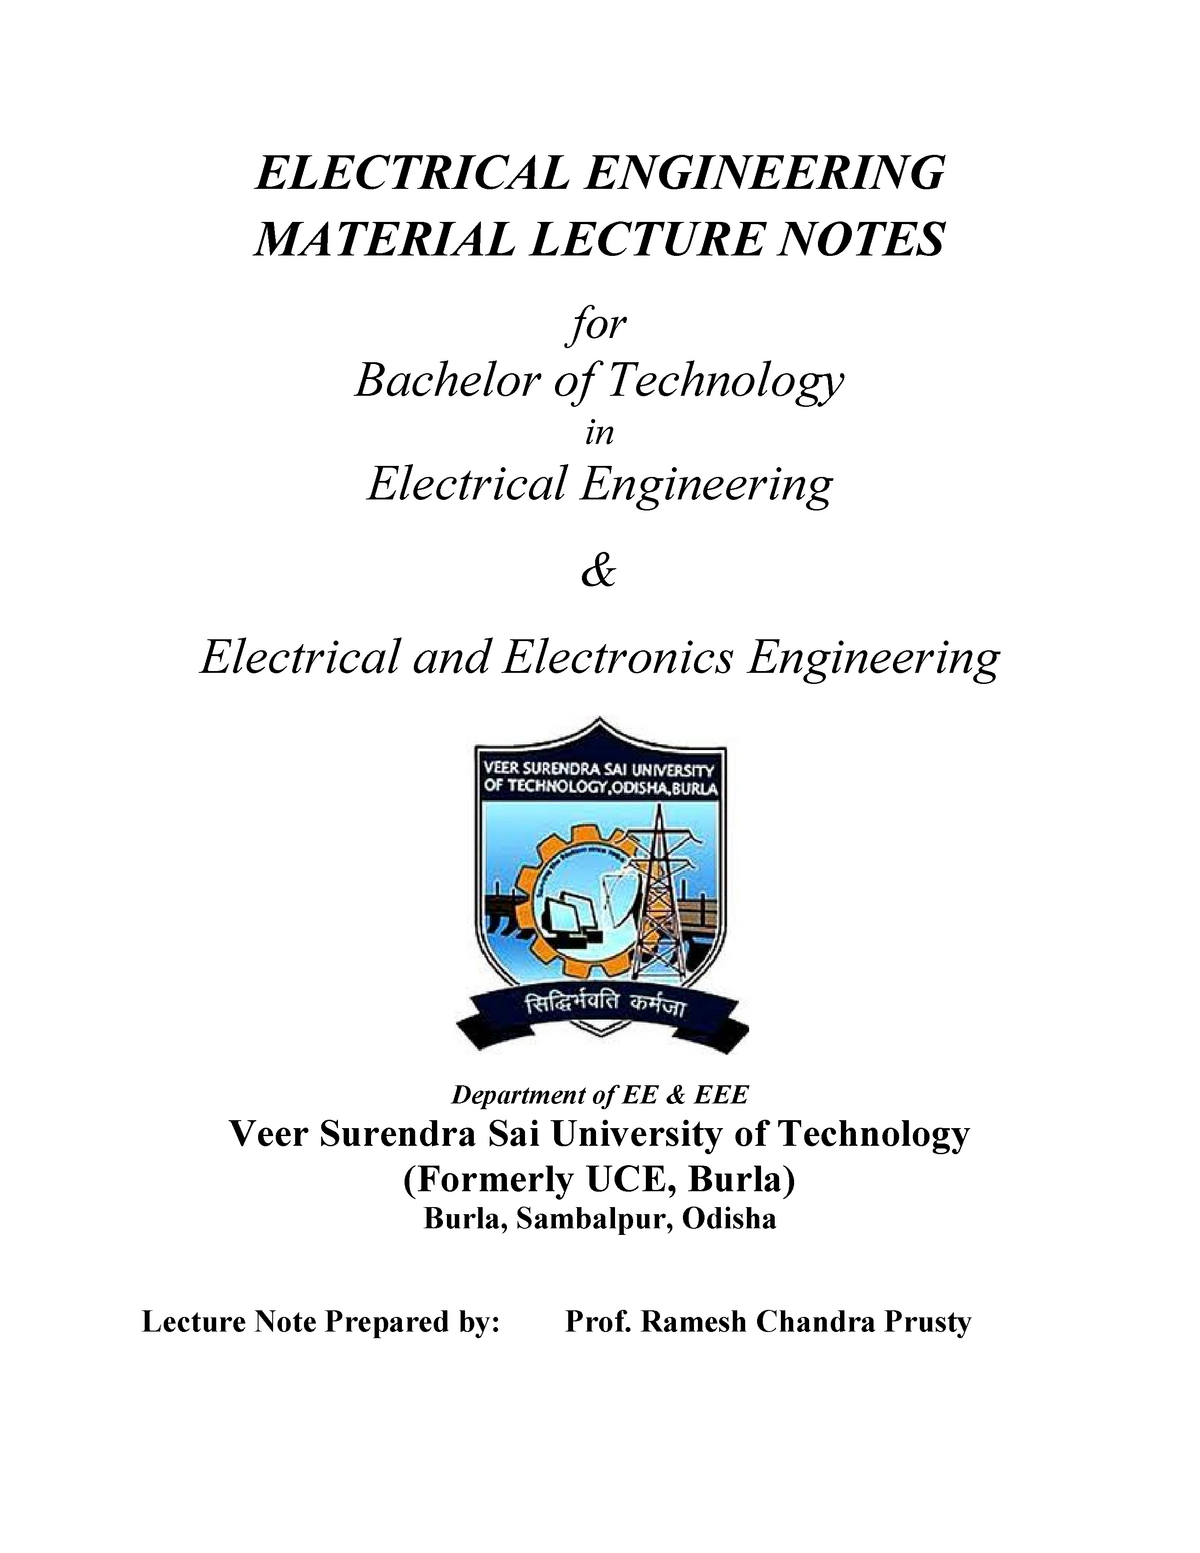 phd thesis electrical engineering